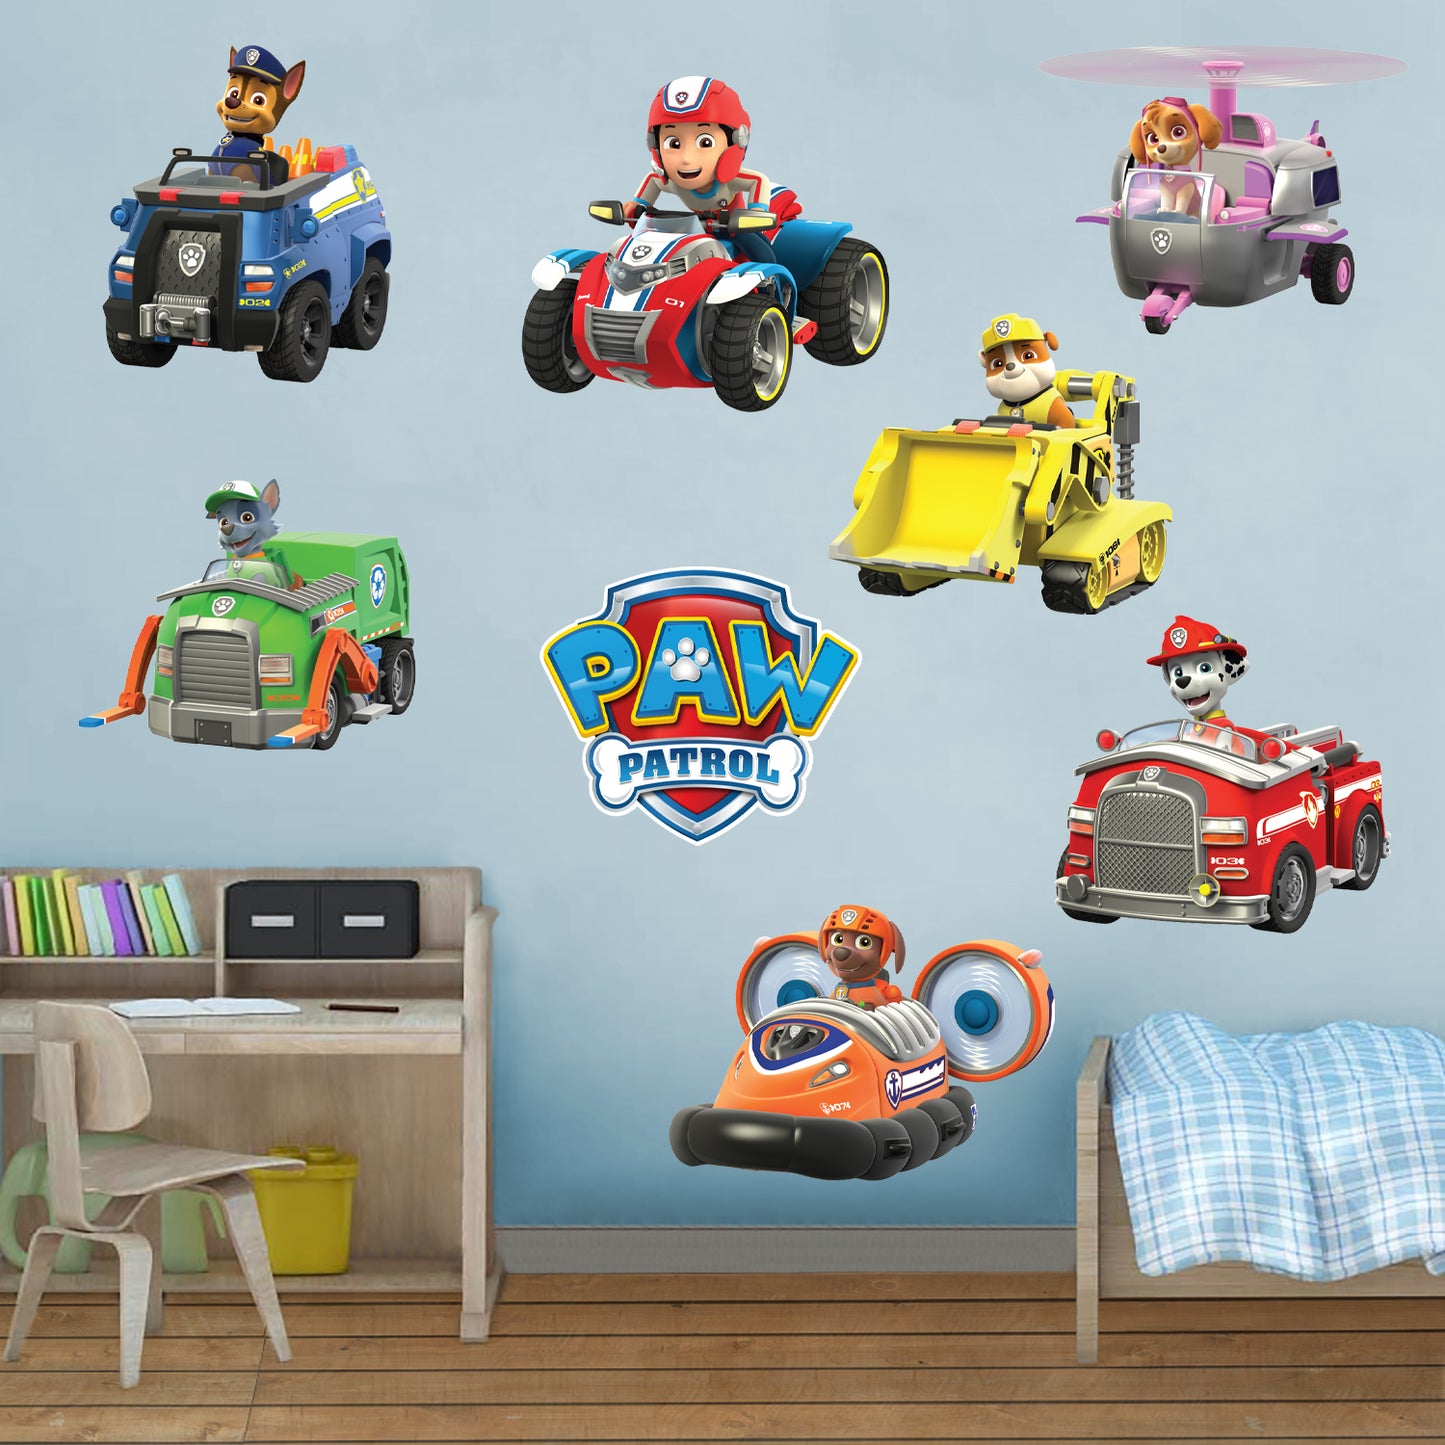 Paw Patrol: Zuma Vehicle RealBig - Officially Licensed Nickelodeon  Removable Adhesive Decal